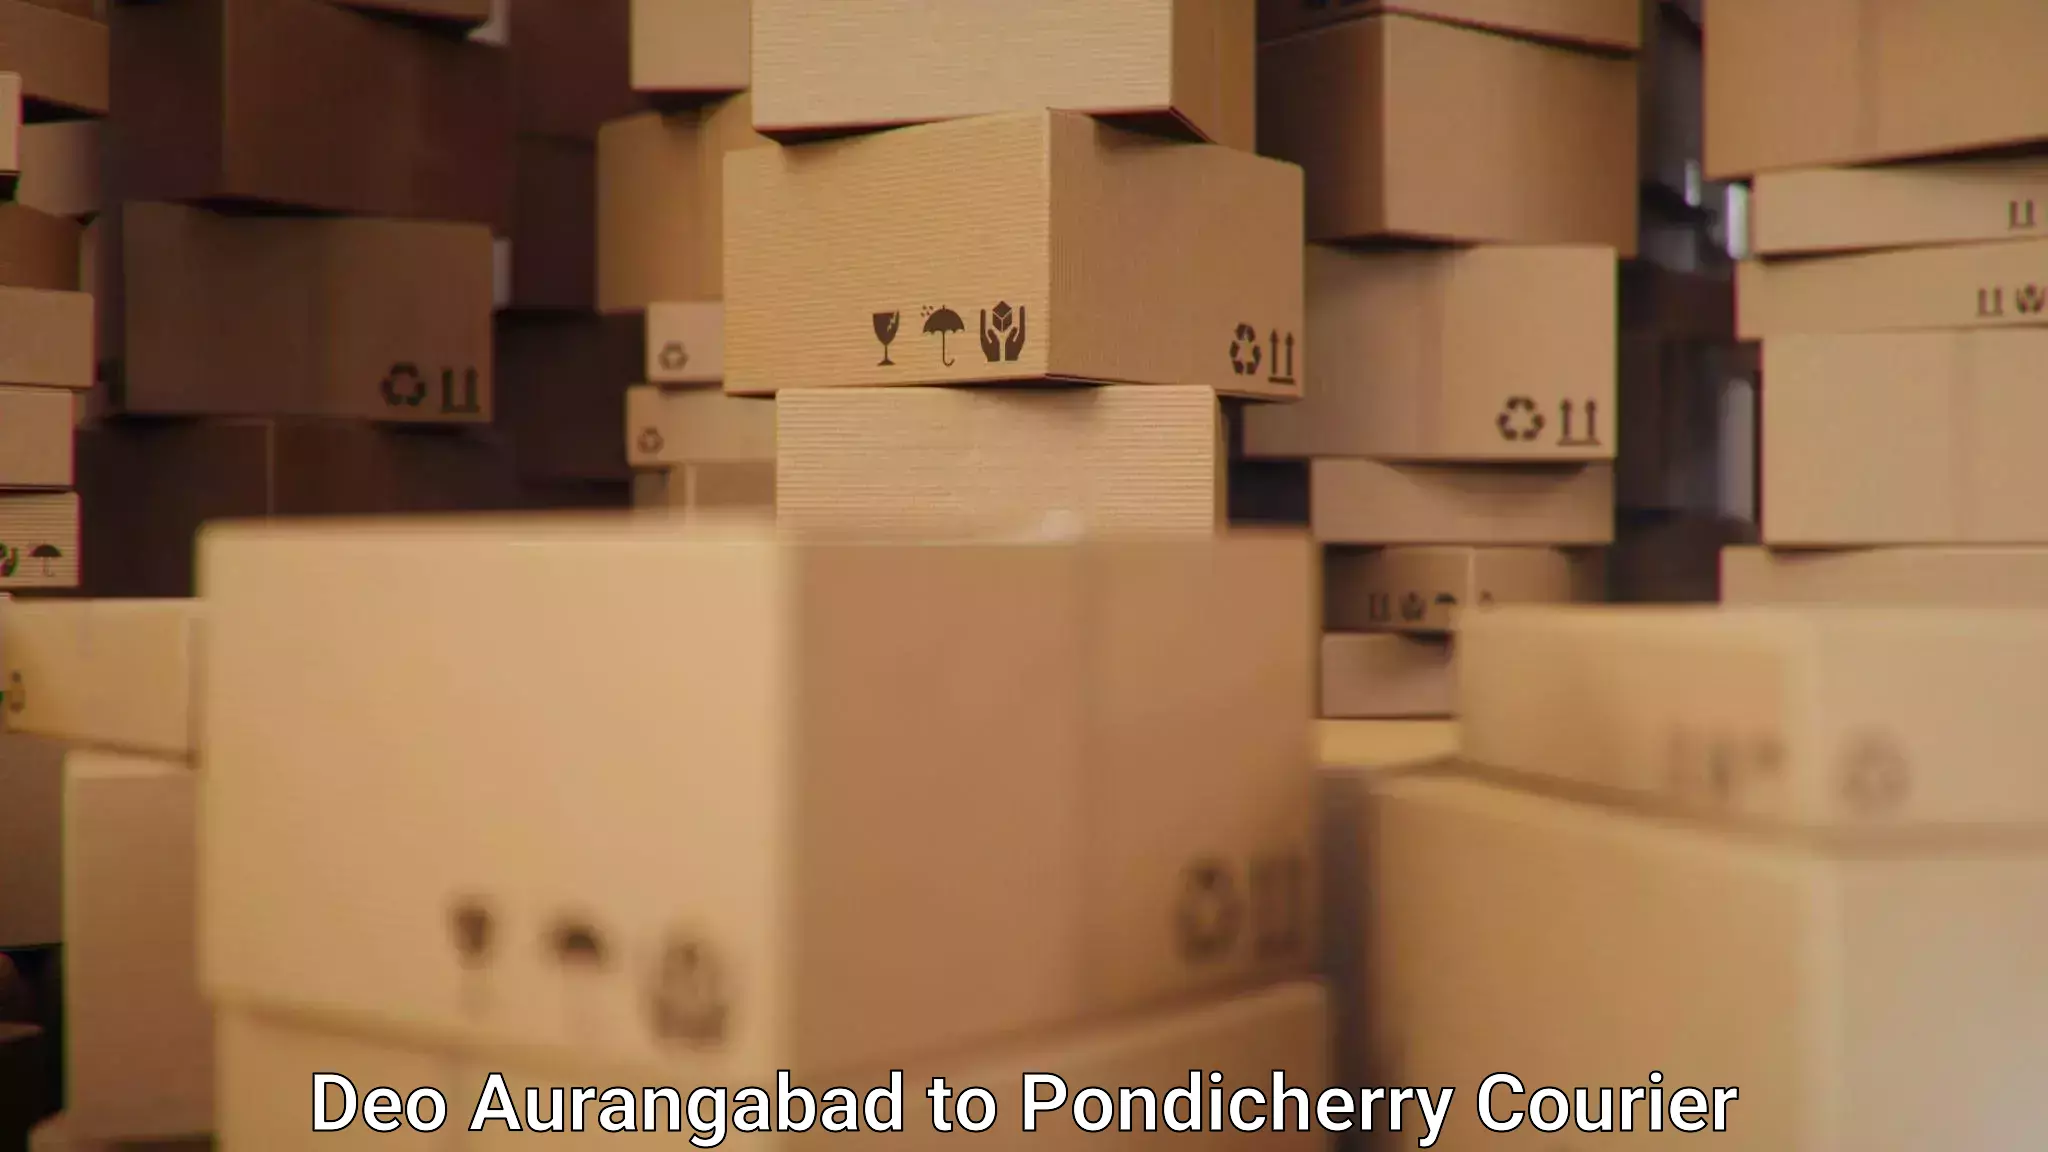 Efficient shipping operations Deo Aurangabad to Pondicherry